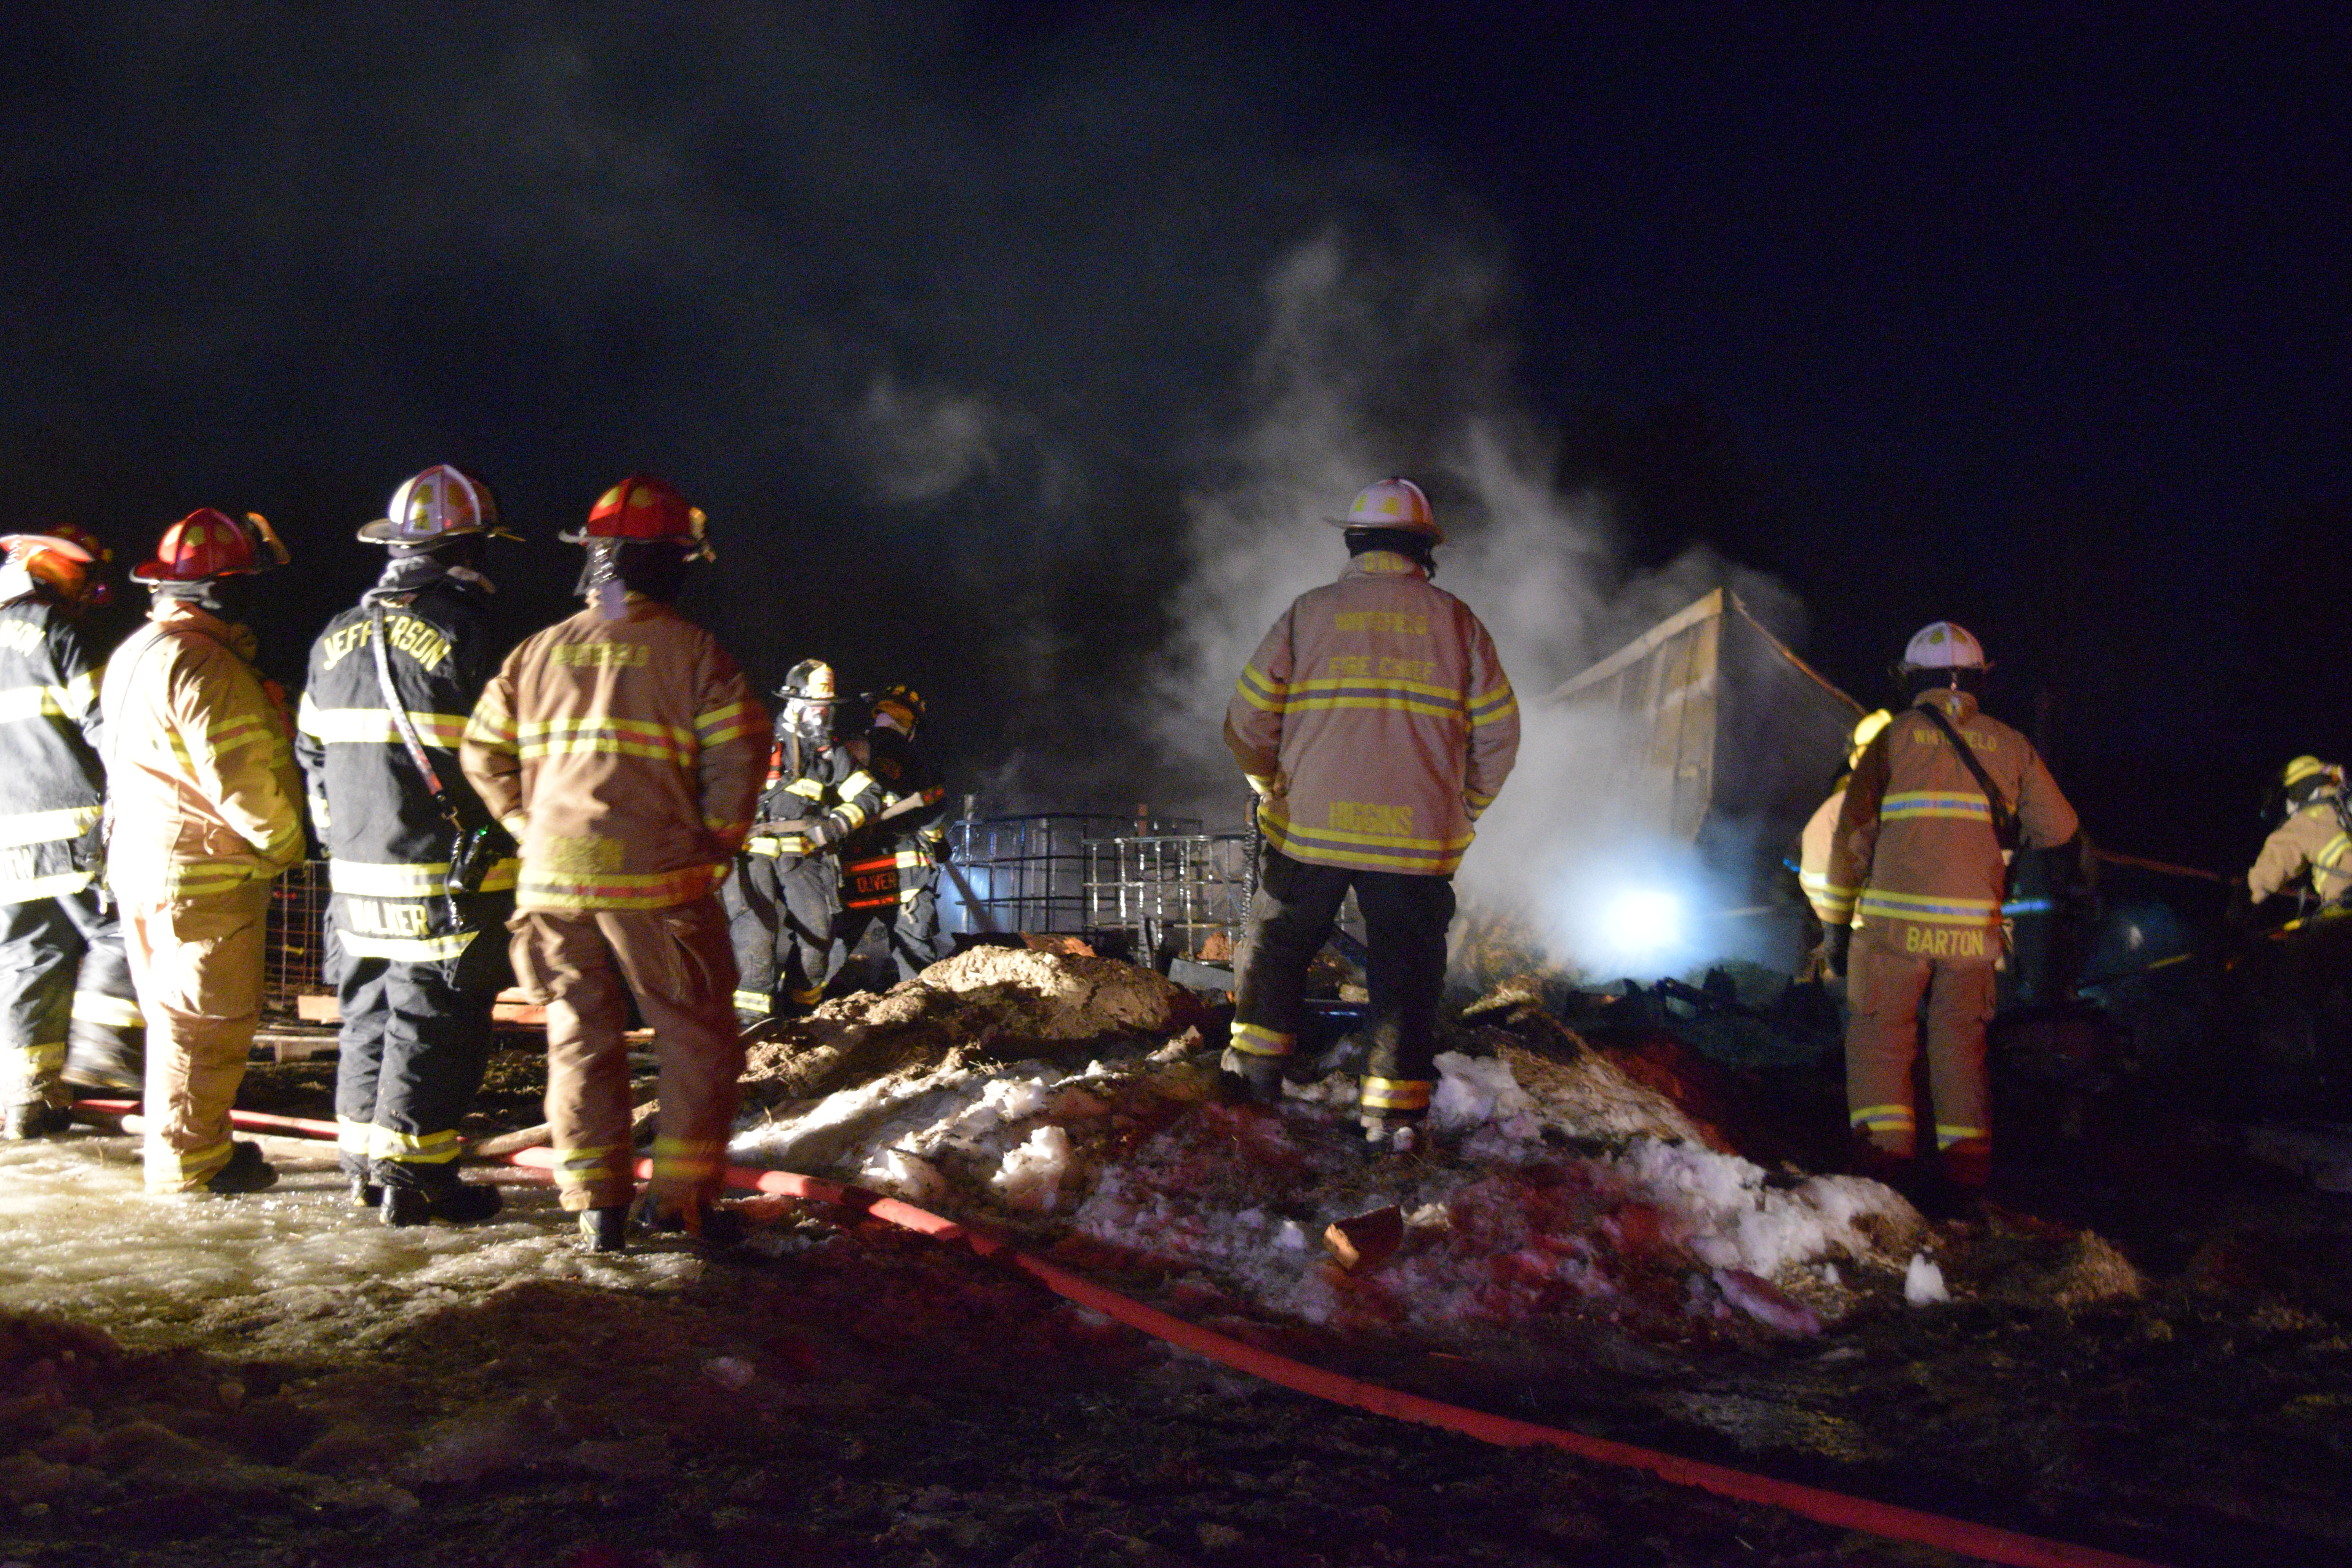 Area firefighters on scene of a barn fire in Jefferson on the night of Sunday, March 17. Farm animals died as a result of the blaze. (Jessica Clifford photo)